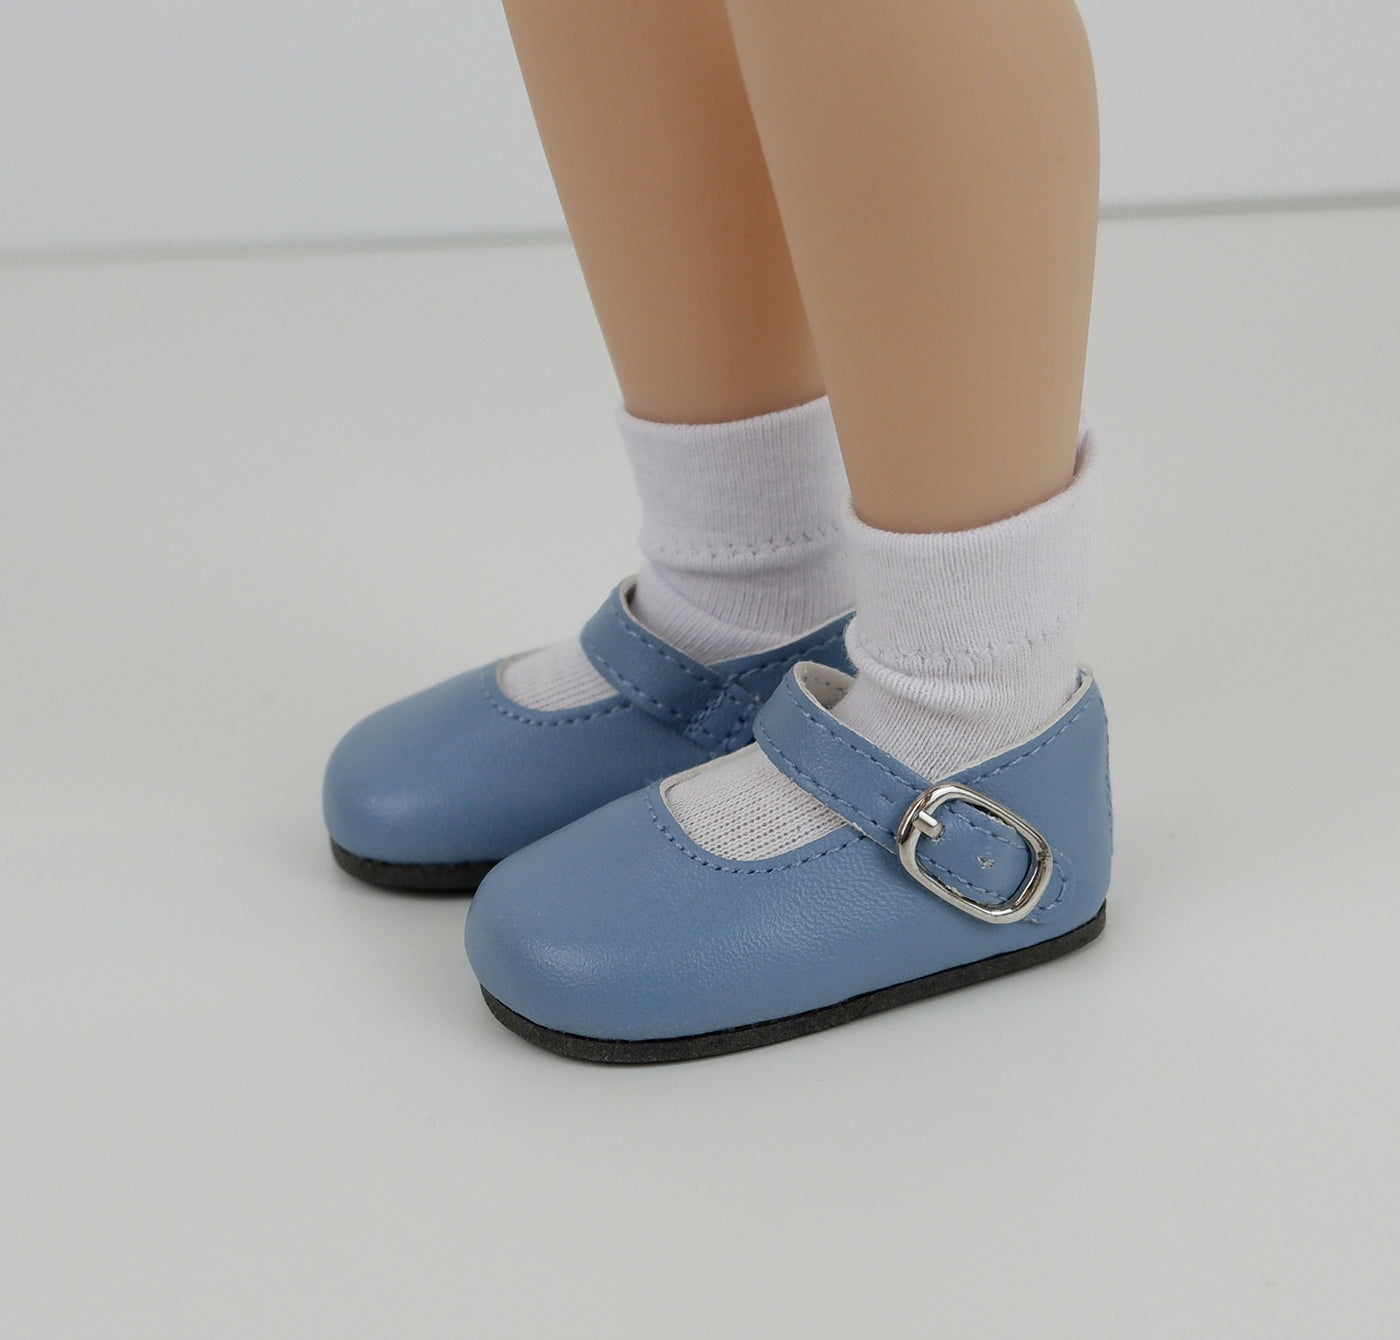 Simple Mary Jane Shoes - Country Blue